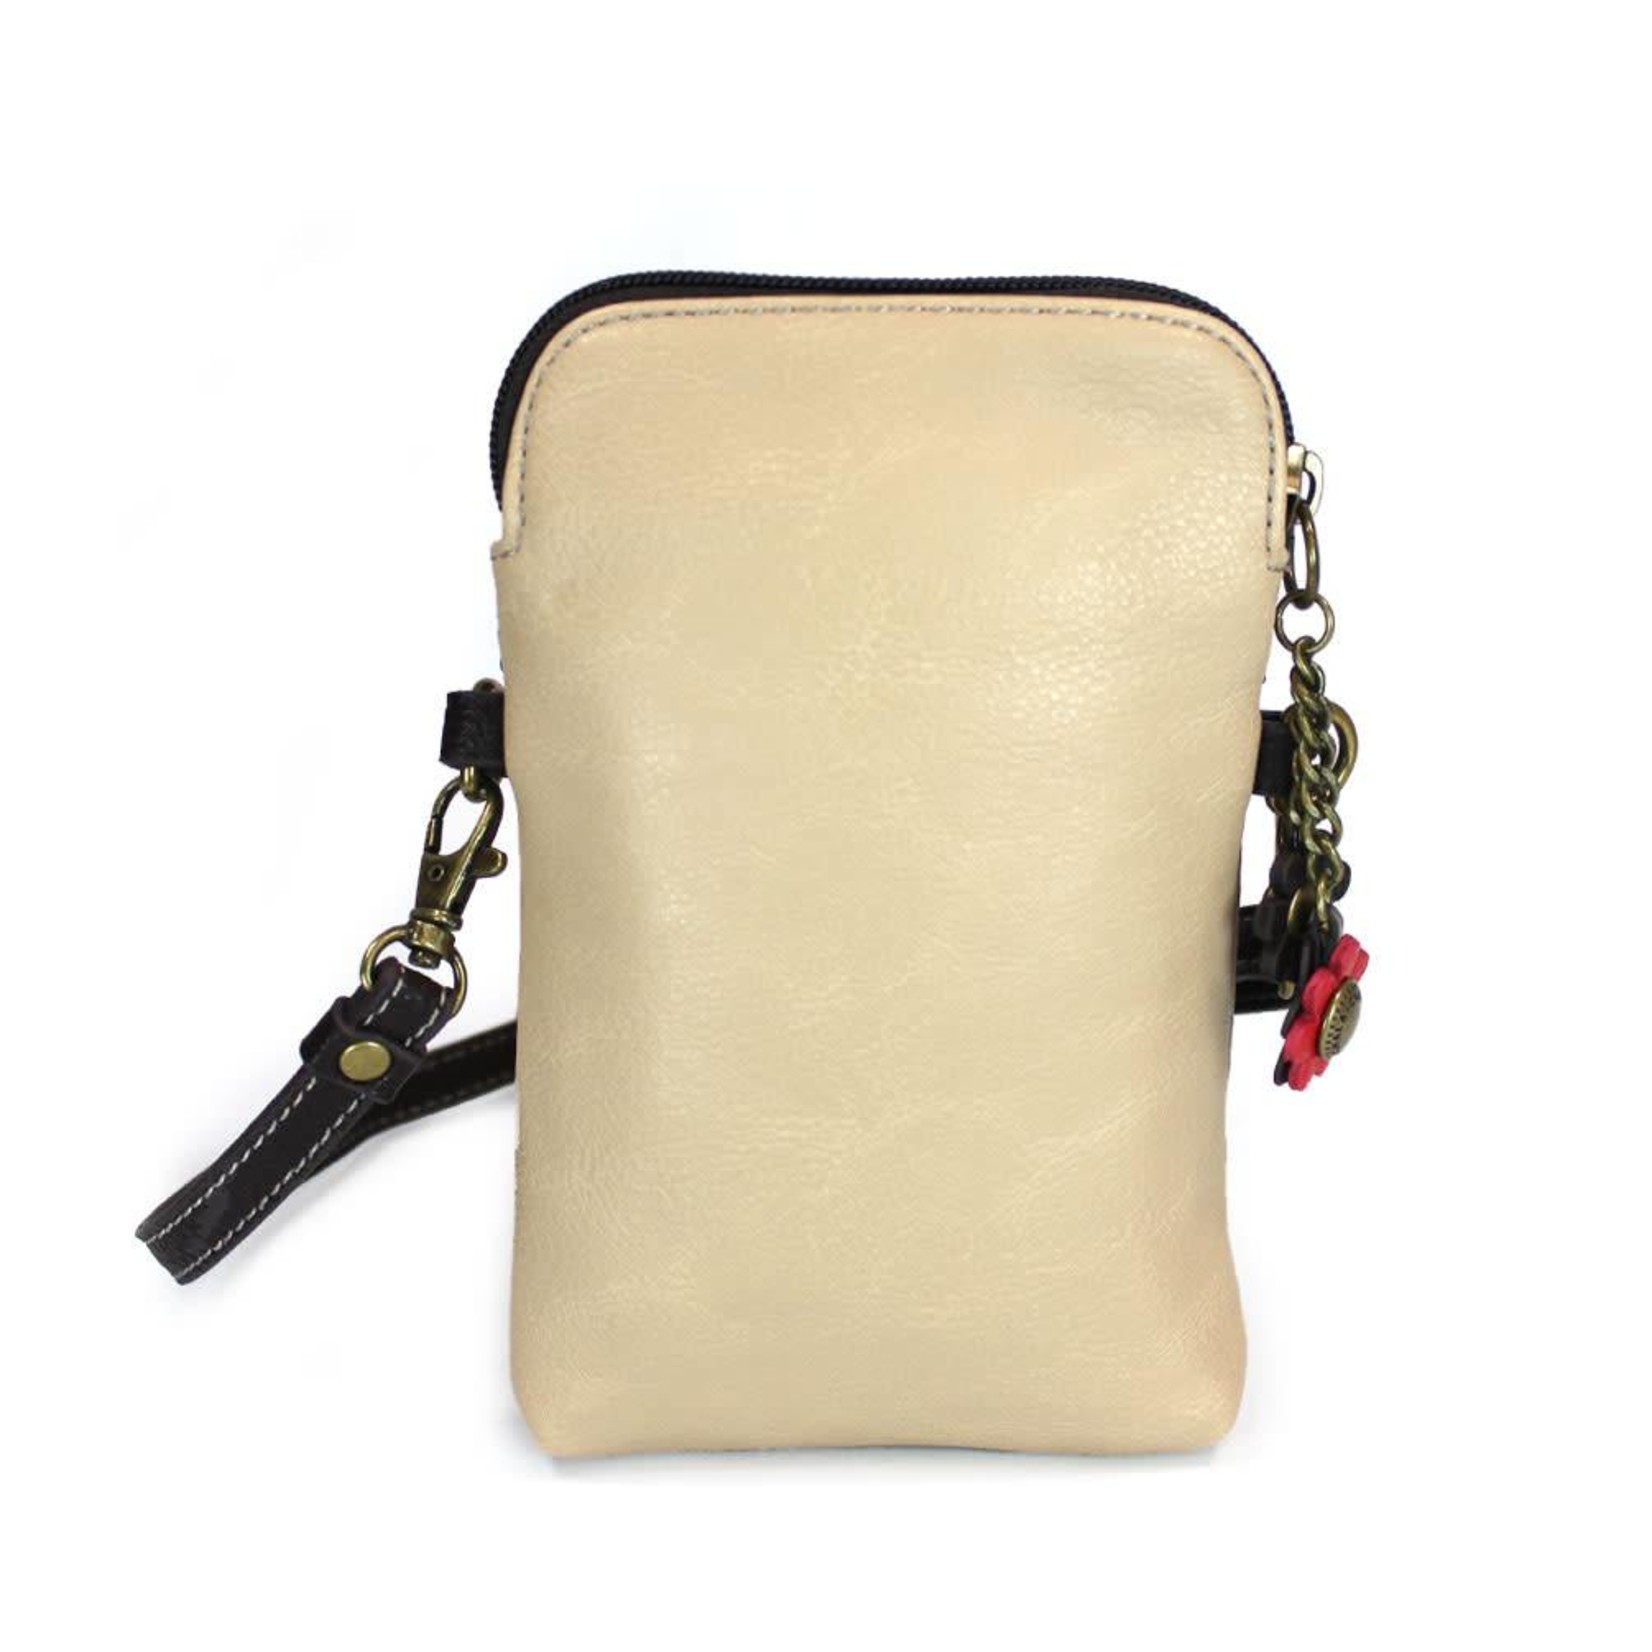 Chala Cell Phone Crossbody New Butterfly Ivory